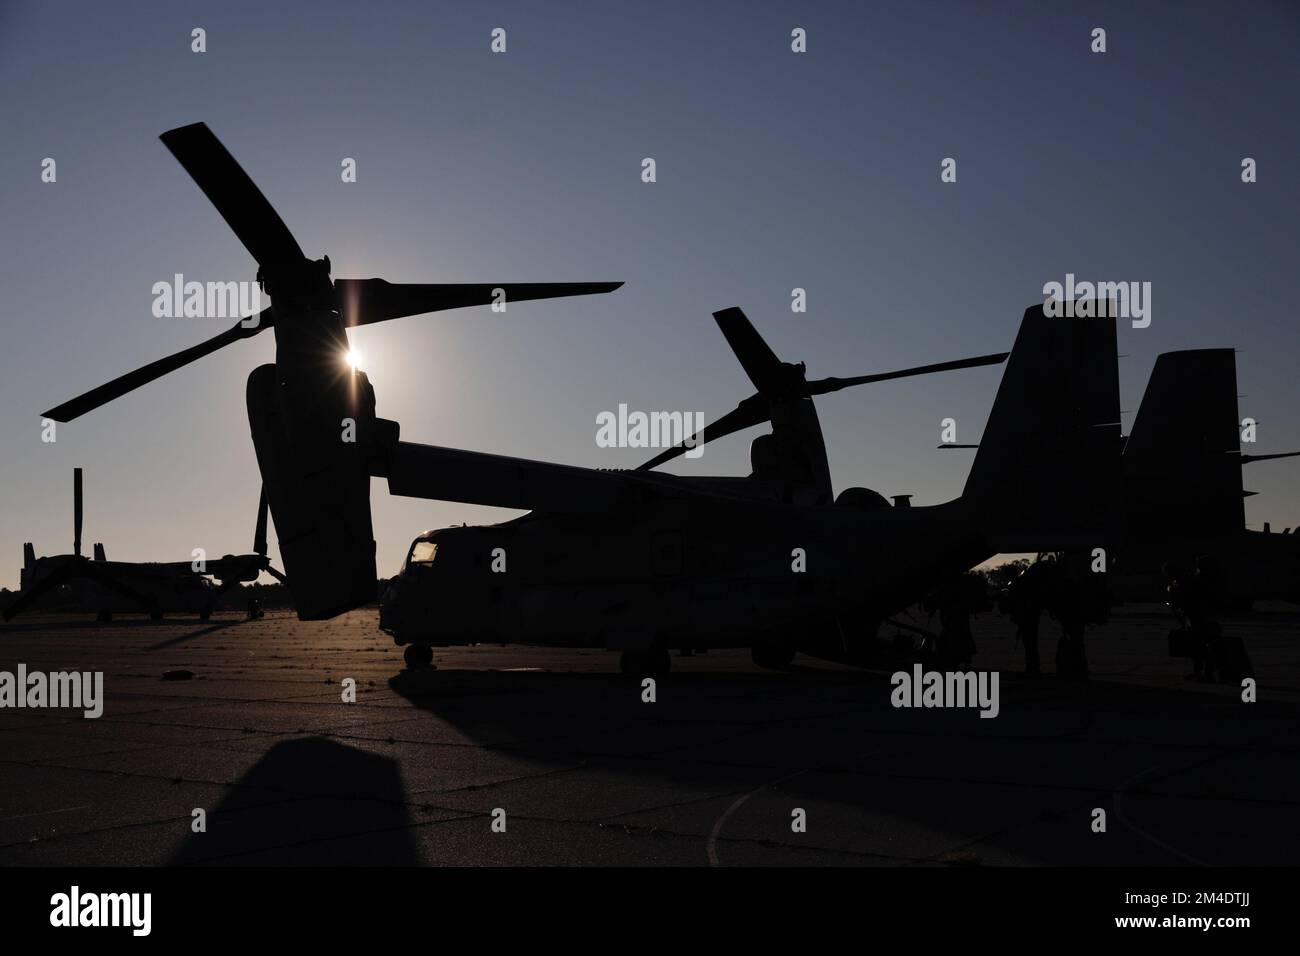 Marines and Sailors with the 26th Marine Expeditionary Unit (MEU) Forward Command Element (FCE) prepare to load an MV-22 Osprey at Marine Corps Auxiliary Landing Field Bogue, North Carolina, Dec. 13, 2022. The 26th MEU FCE traveled to a destination in Savannah, Georgia, as part of Marine Expeditionary Unit Exercise (MEUEX) I to simulate the establishment of a forward command. The focus of MEU Exercise I was to plan, brief, and execute several missions using the rapid response planning process in preparation for deployment alongside the Bataan Amphibious Ready Group. Stock Photo